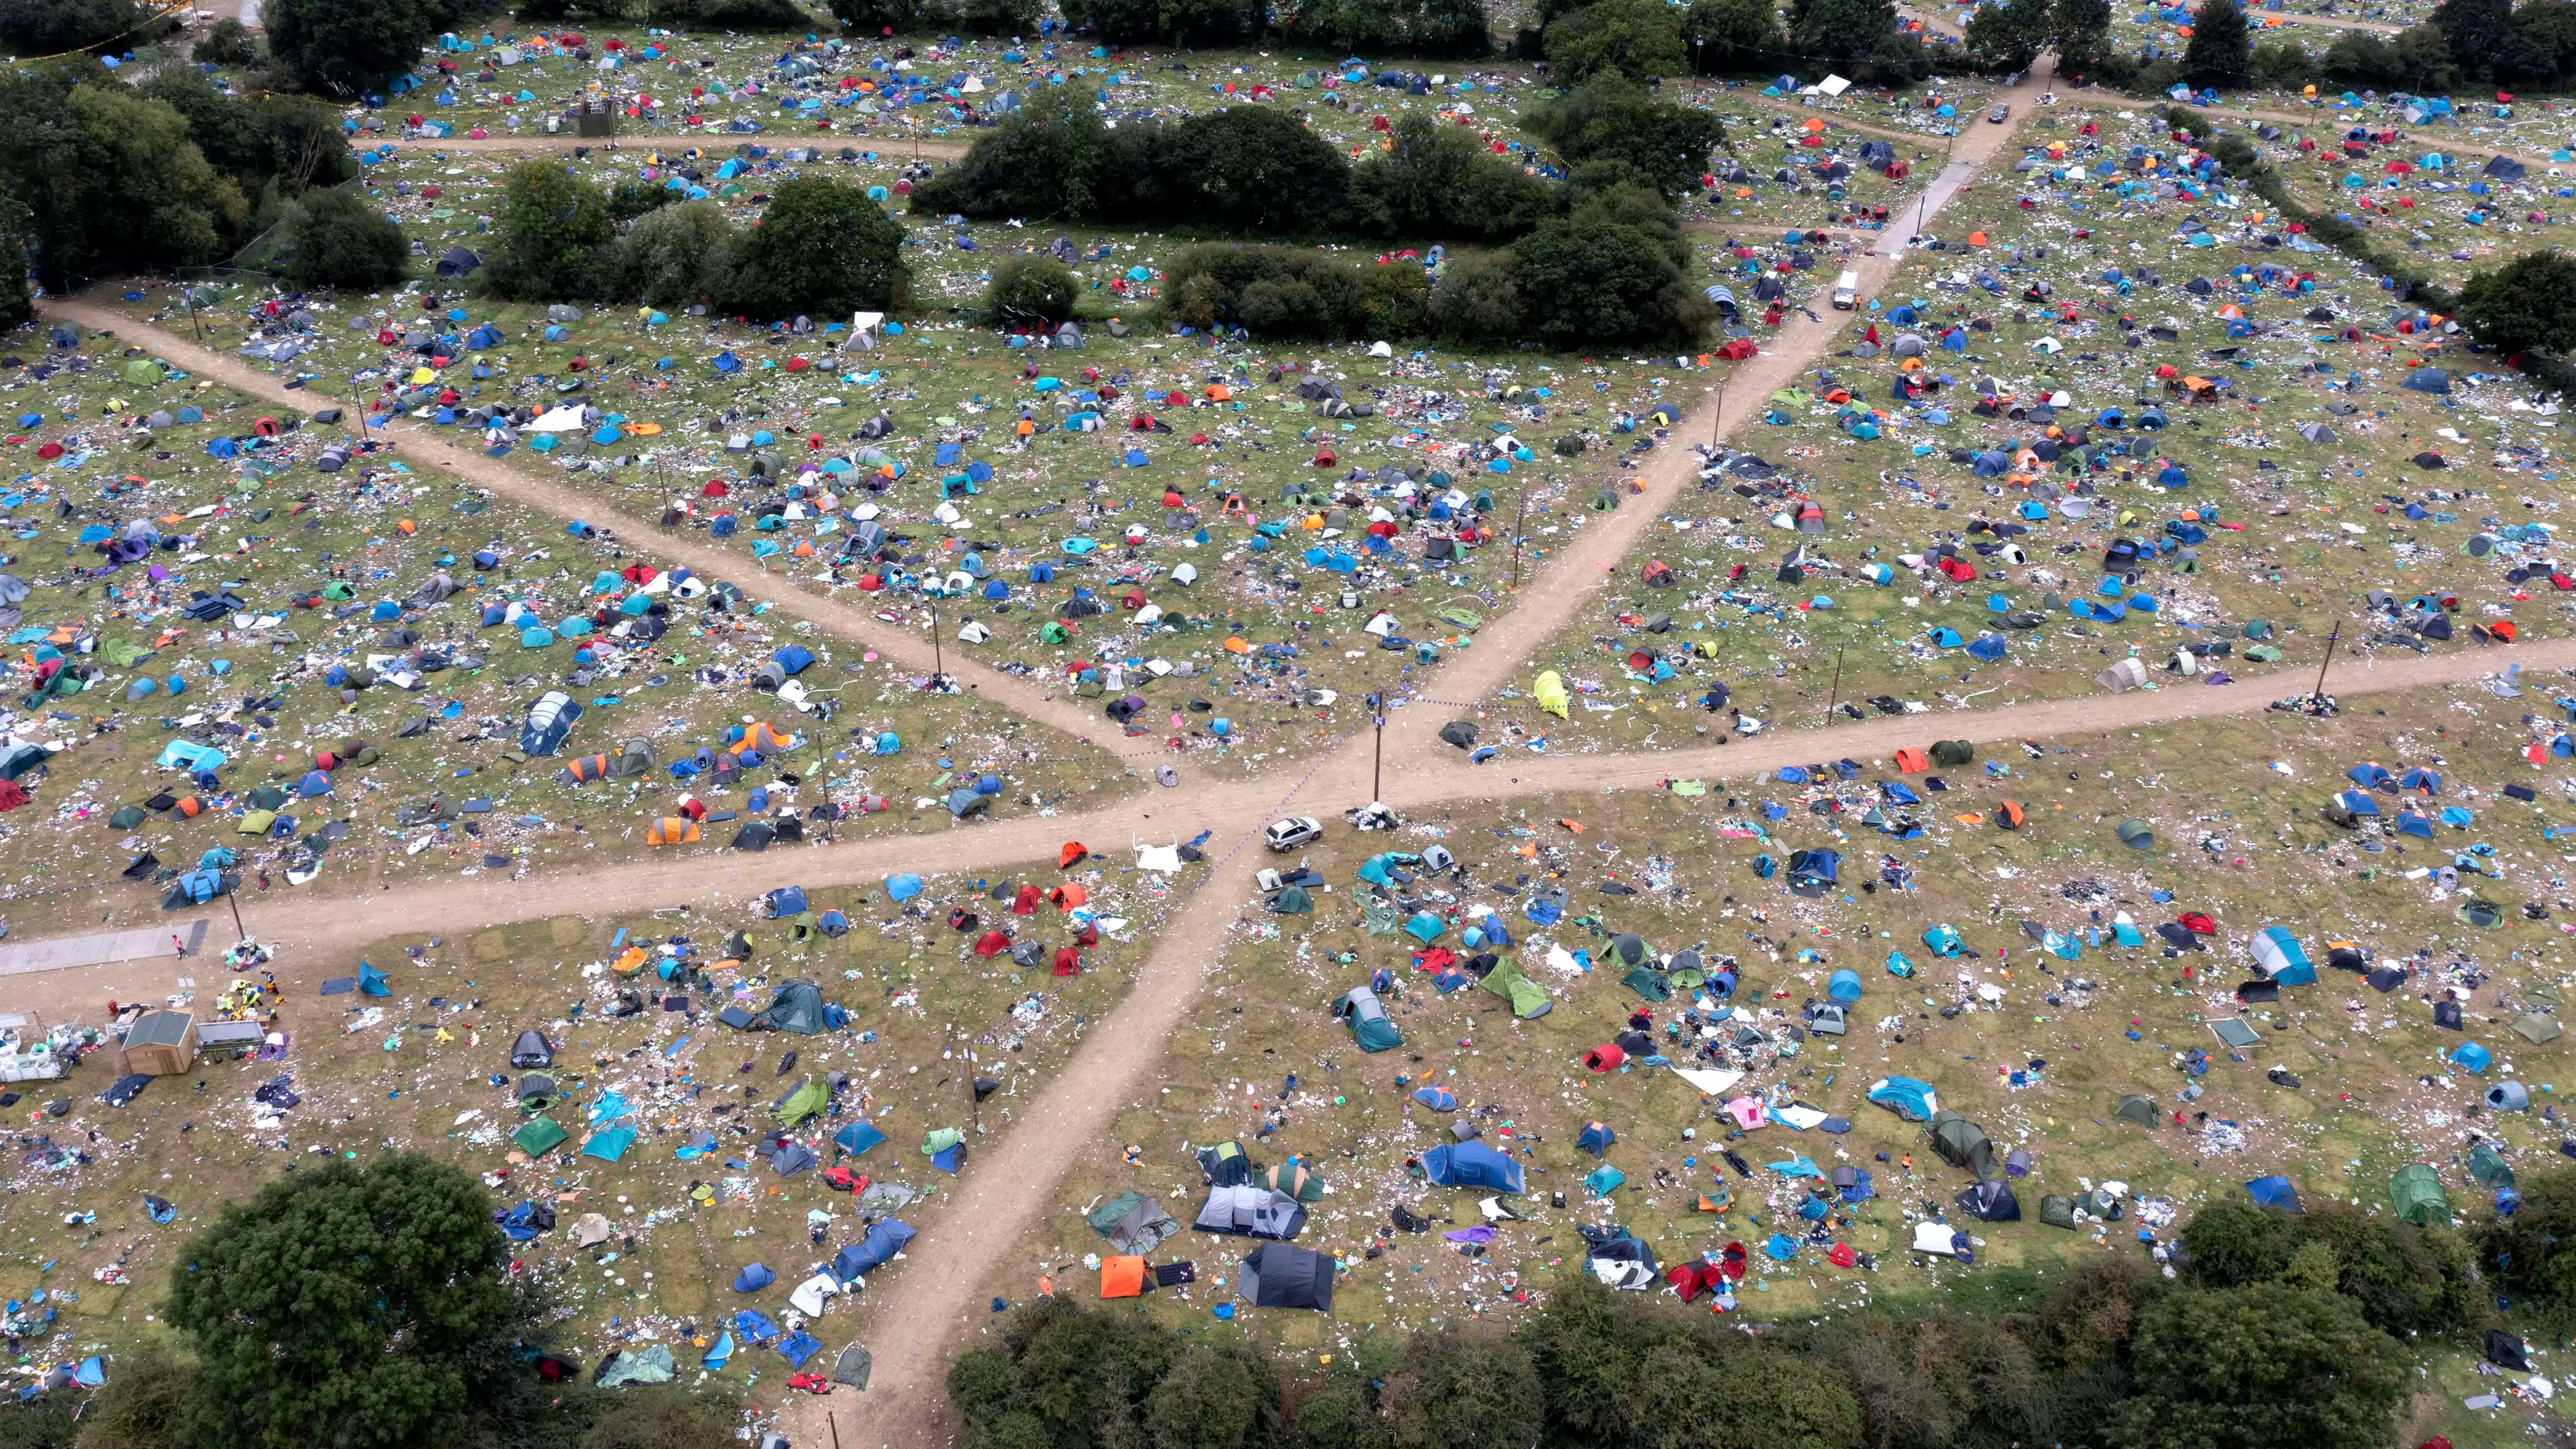 Fields Filled With Camping Equipment And Rubbish Following Reading And Leeds Festival